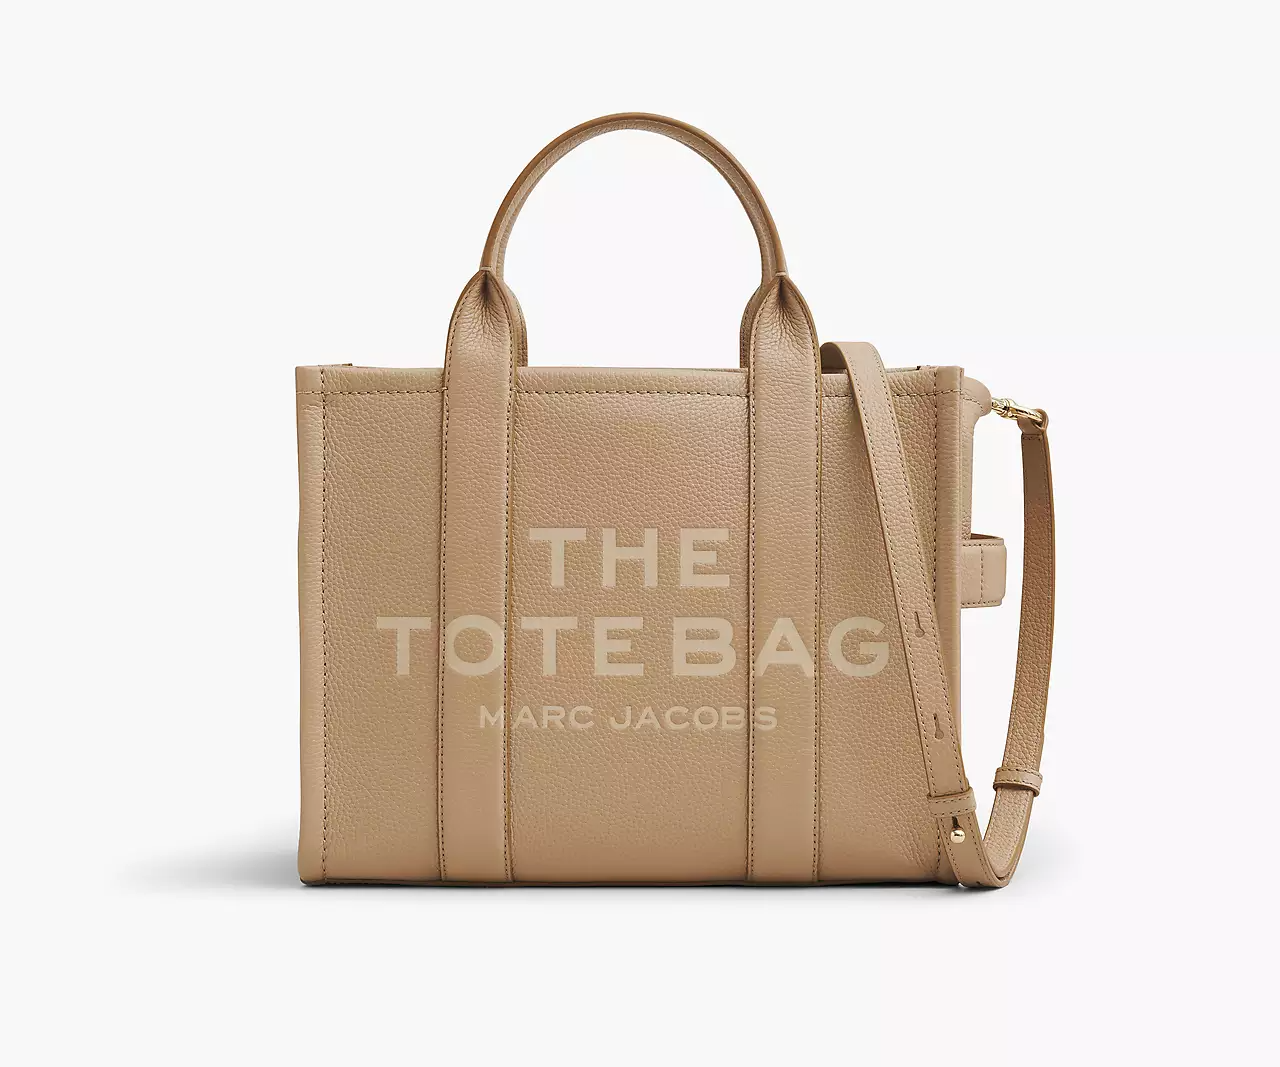 MARC JACOBS The Leather Medium Tote Bag - Camel